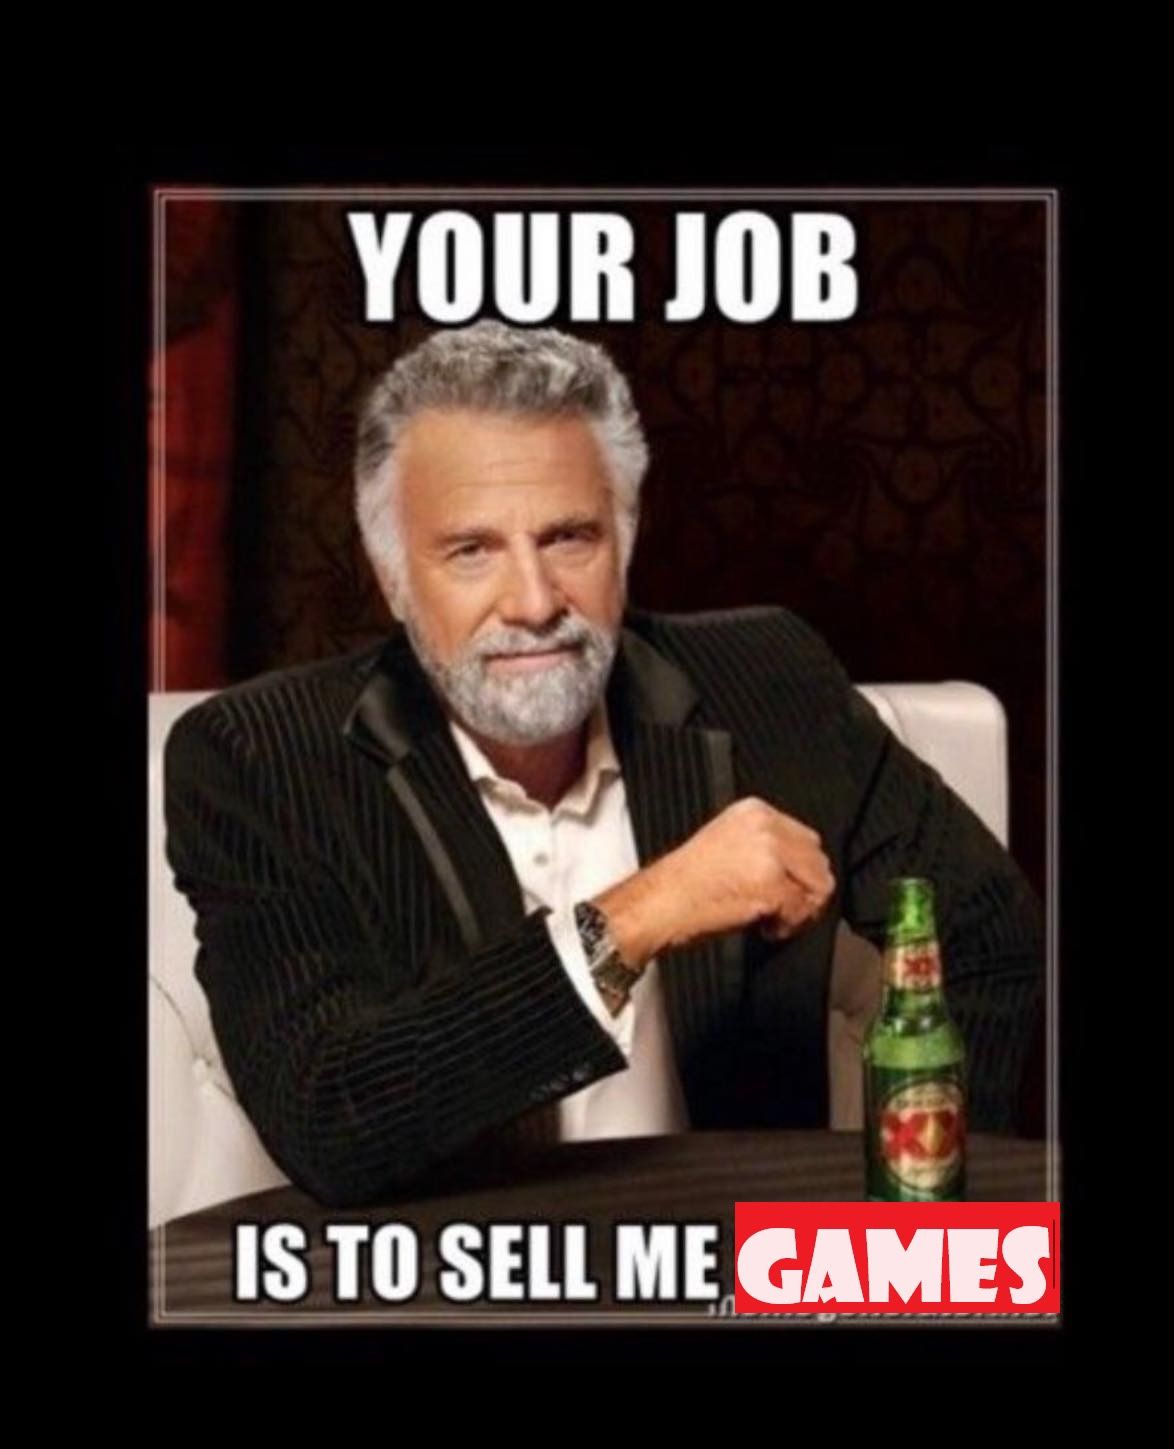 SELL ME YOUR GAMES AND CONSOLES!